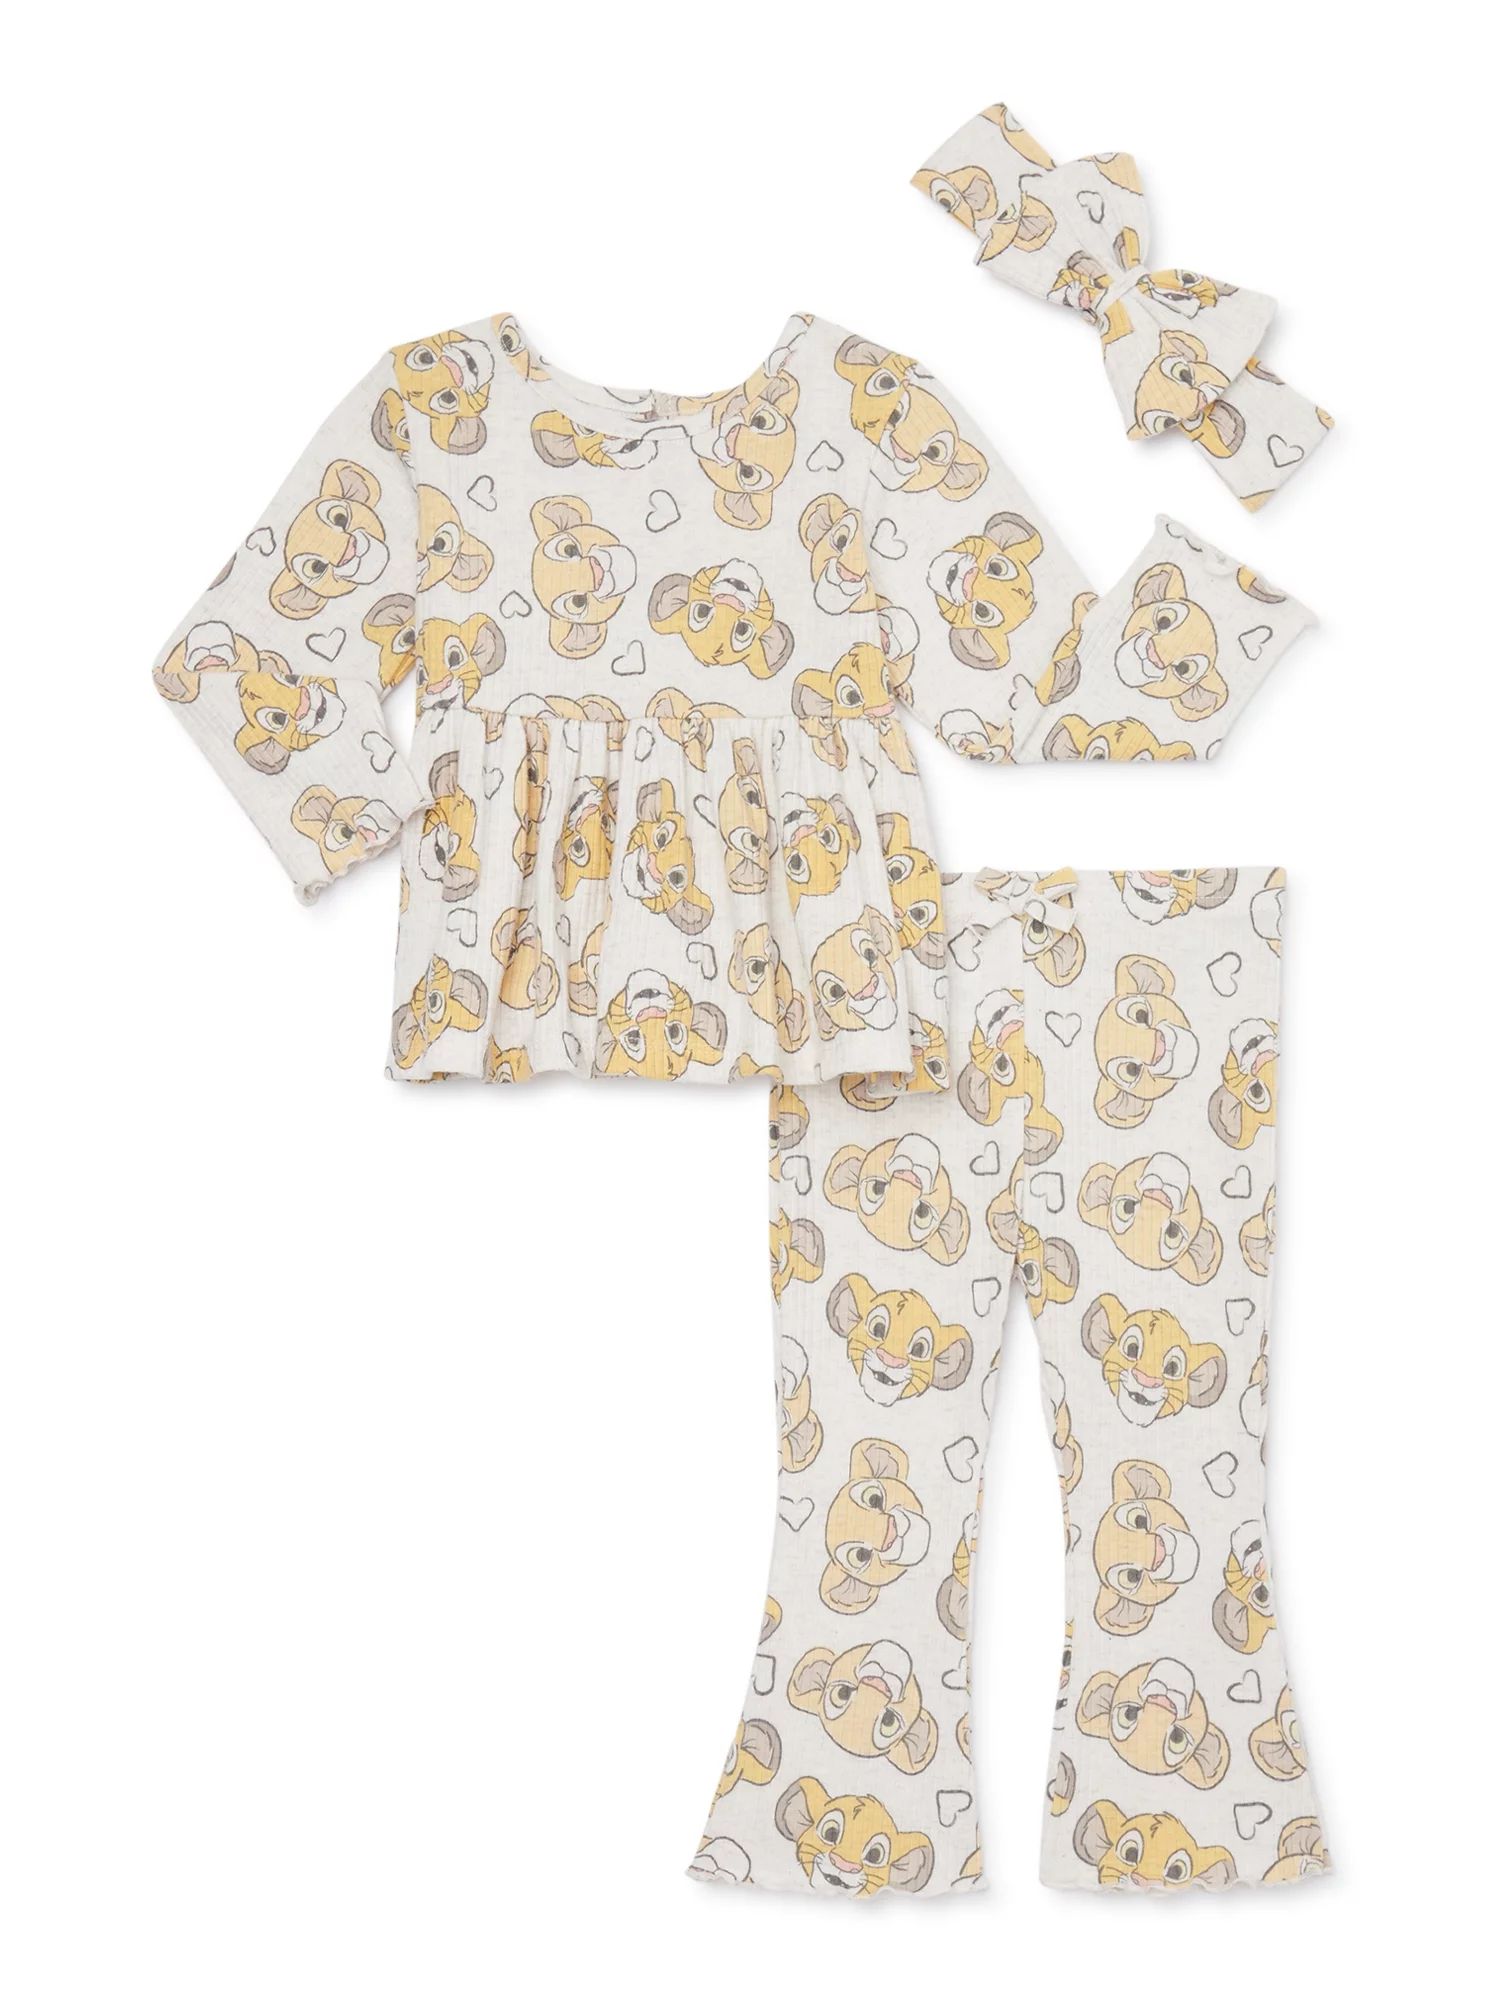 Disney The Lion King Baby Girls Top, Pants and Headband, 3-Piece Set, Sizes 0/3-24 Months | Walmart (US)